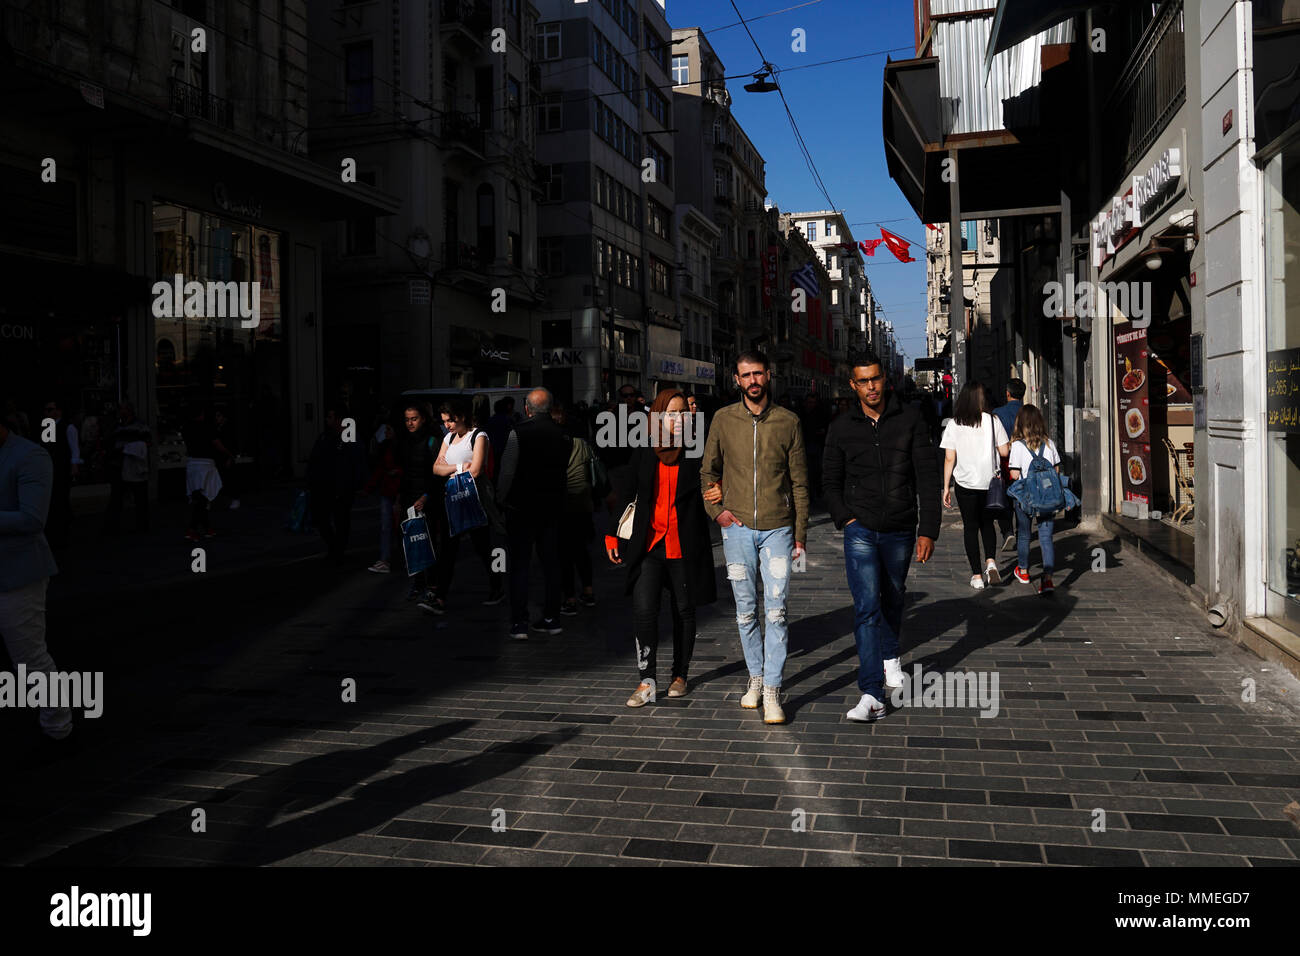 Istanbul, Turkey - April 19, 2018: Arap ethnicity tourists are walking at The Istiklal Street, Beyoglu in a sunny springtime day. There are many store Stock Photo